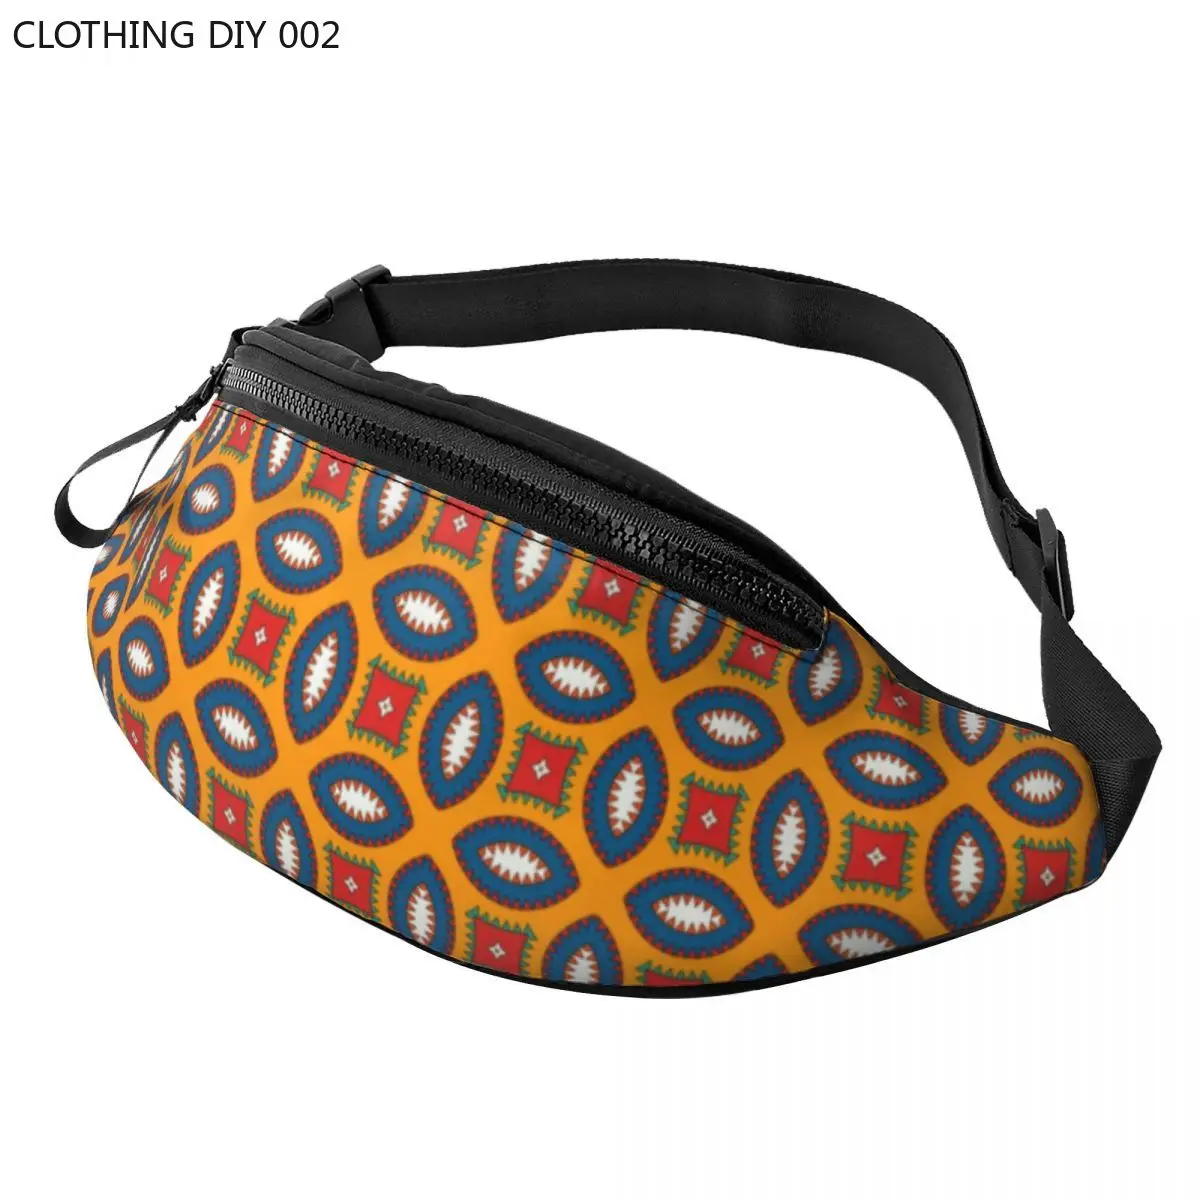 

Casual Colorful African Ankara Pattern Fanny Pack for Traveling Men Women Geometric Crossbody Waist Bag Phone Money Pouch